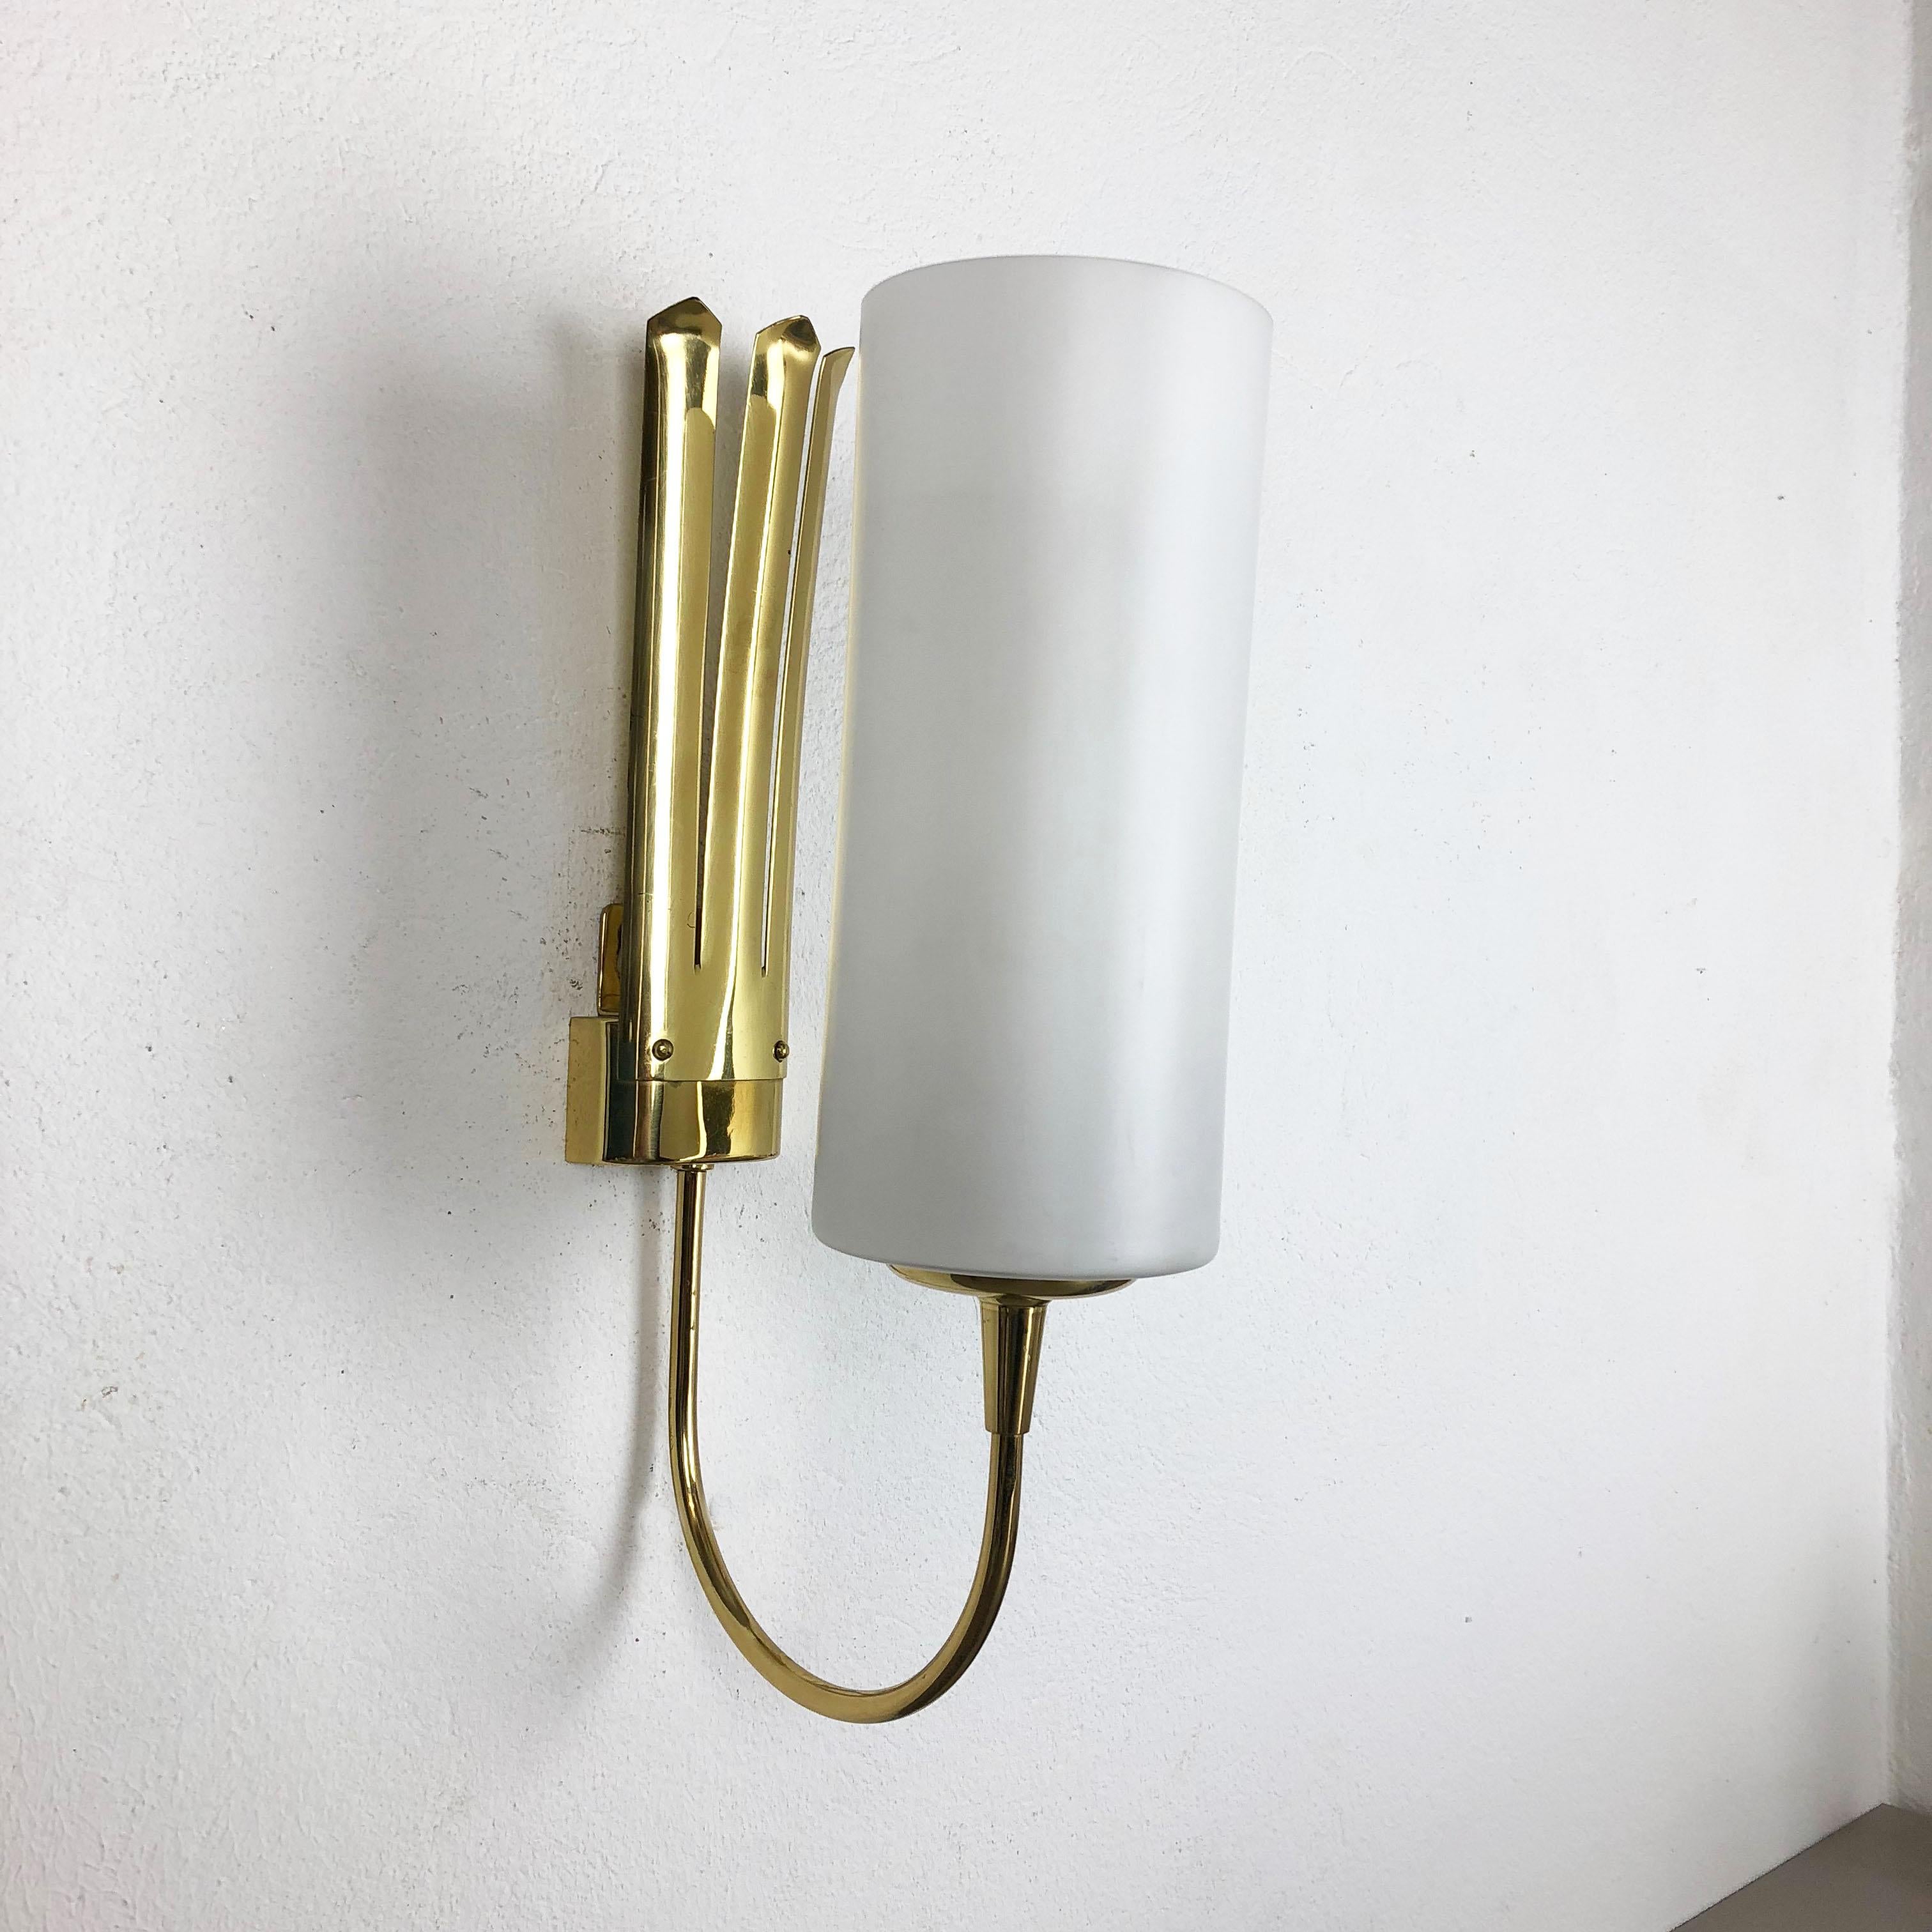 Article:

Set of two

Wall light scones


Origin:

Italy



Age:

1950s



This set of two modernist lights was produced in Italy in the 1950s. It is made from solid brass metal and has a lovely formed white satin tube form shade.